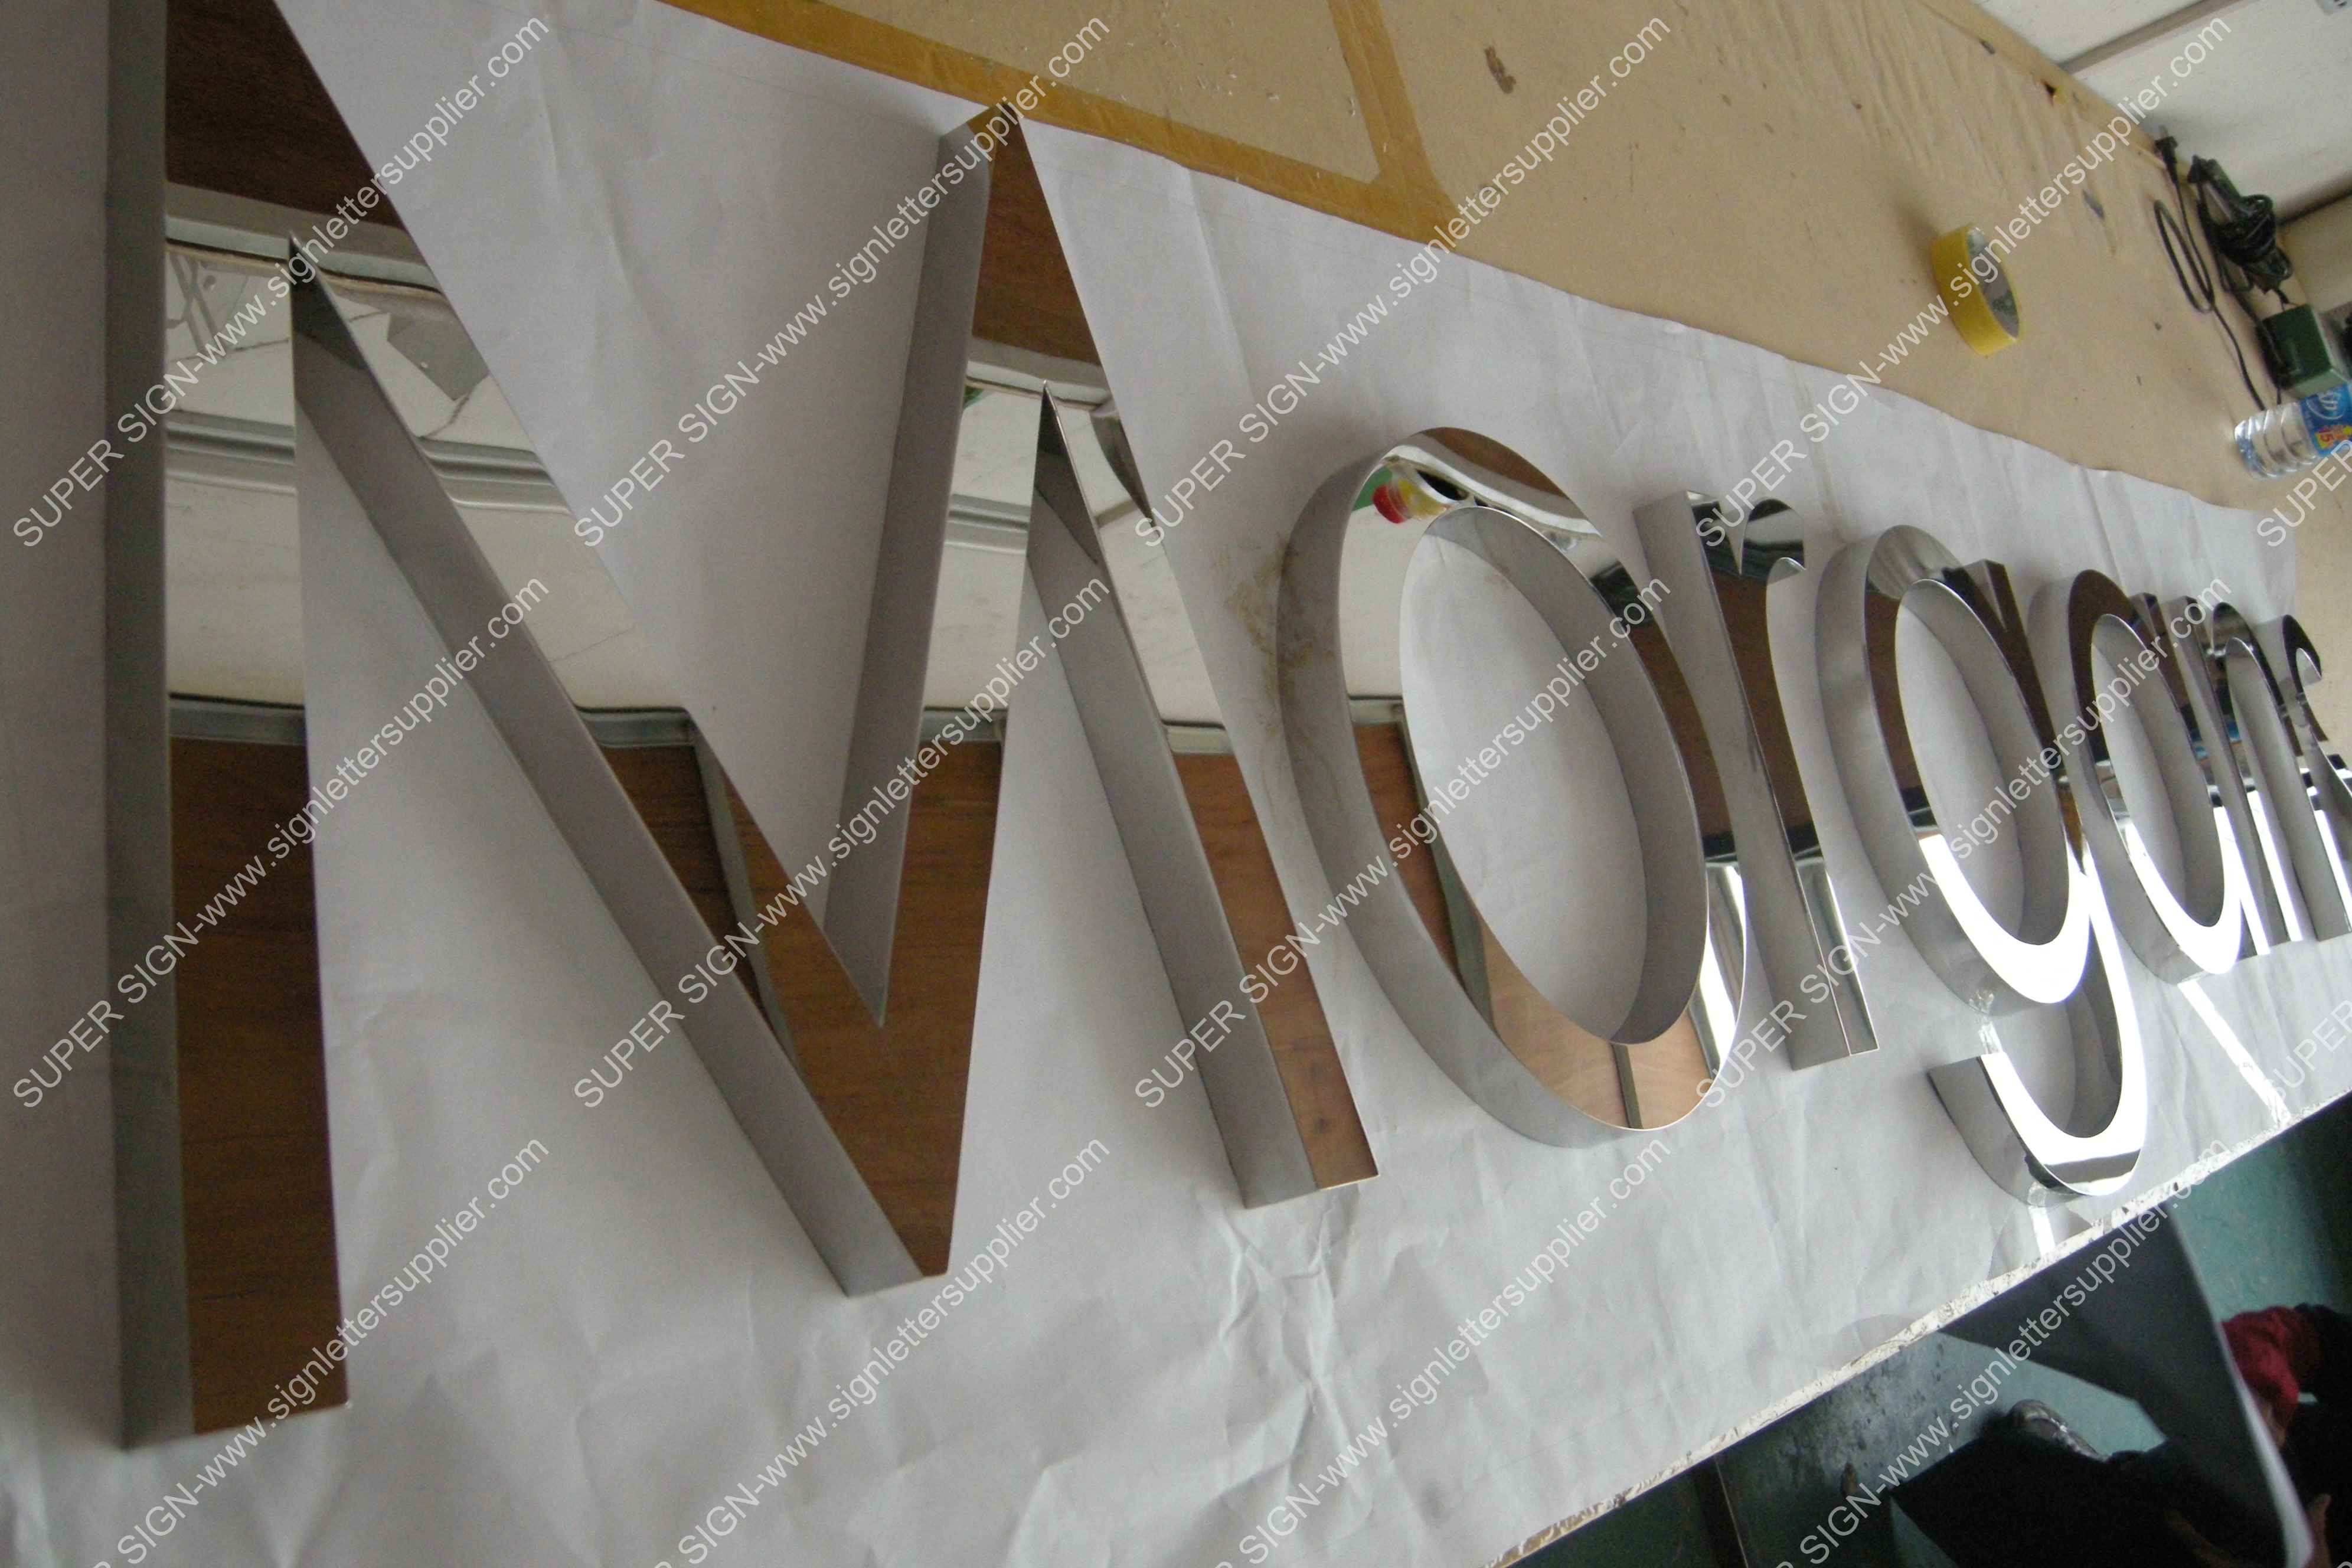 Fabricated polished steel letter